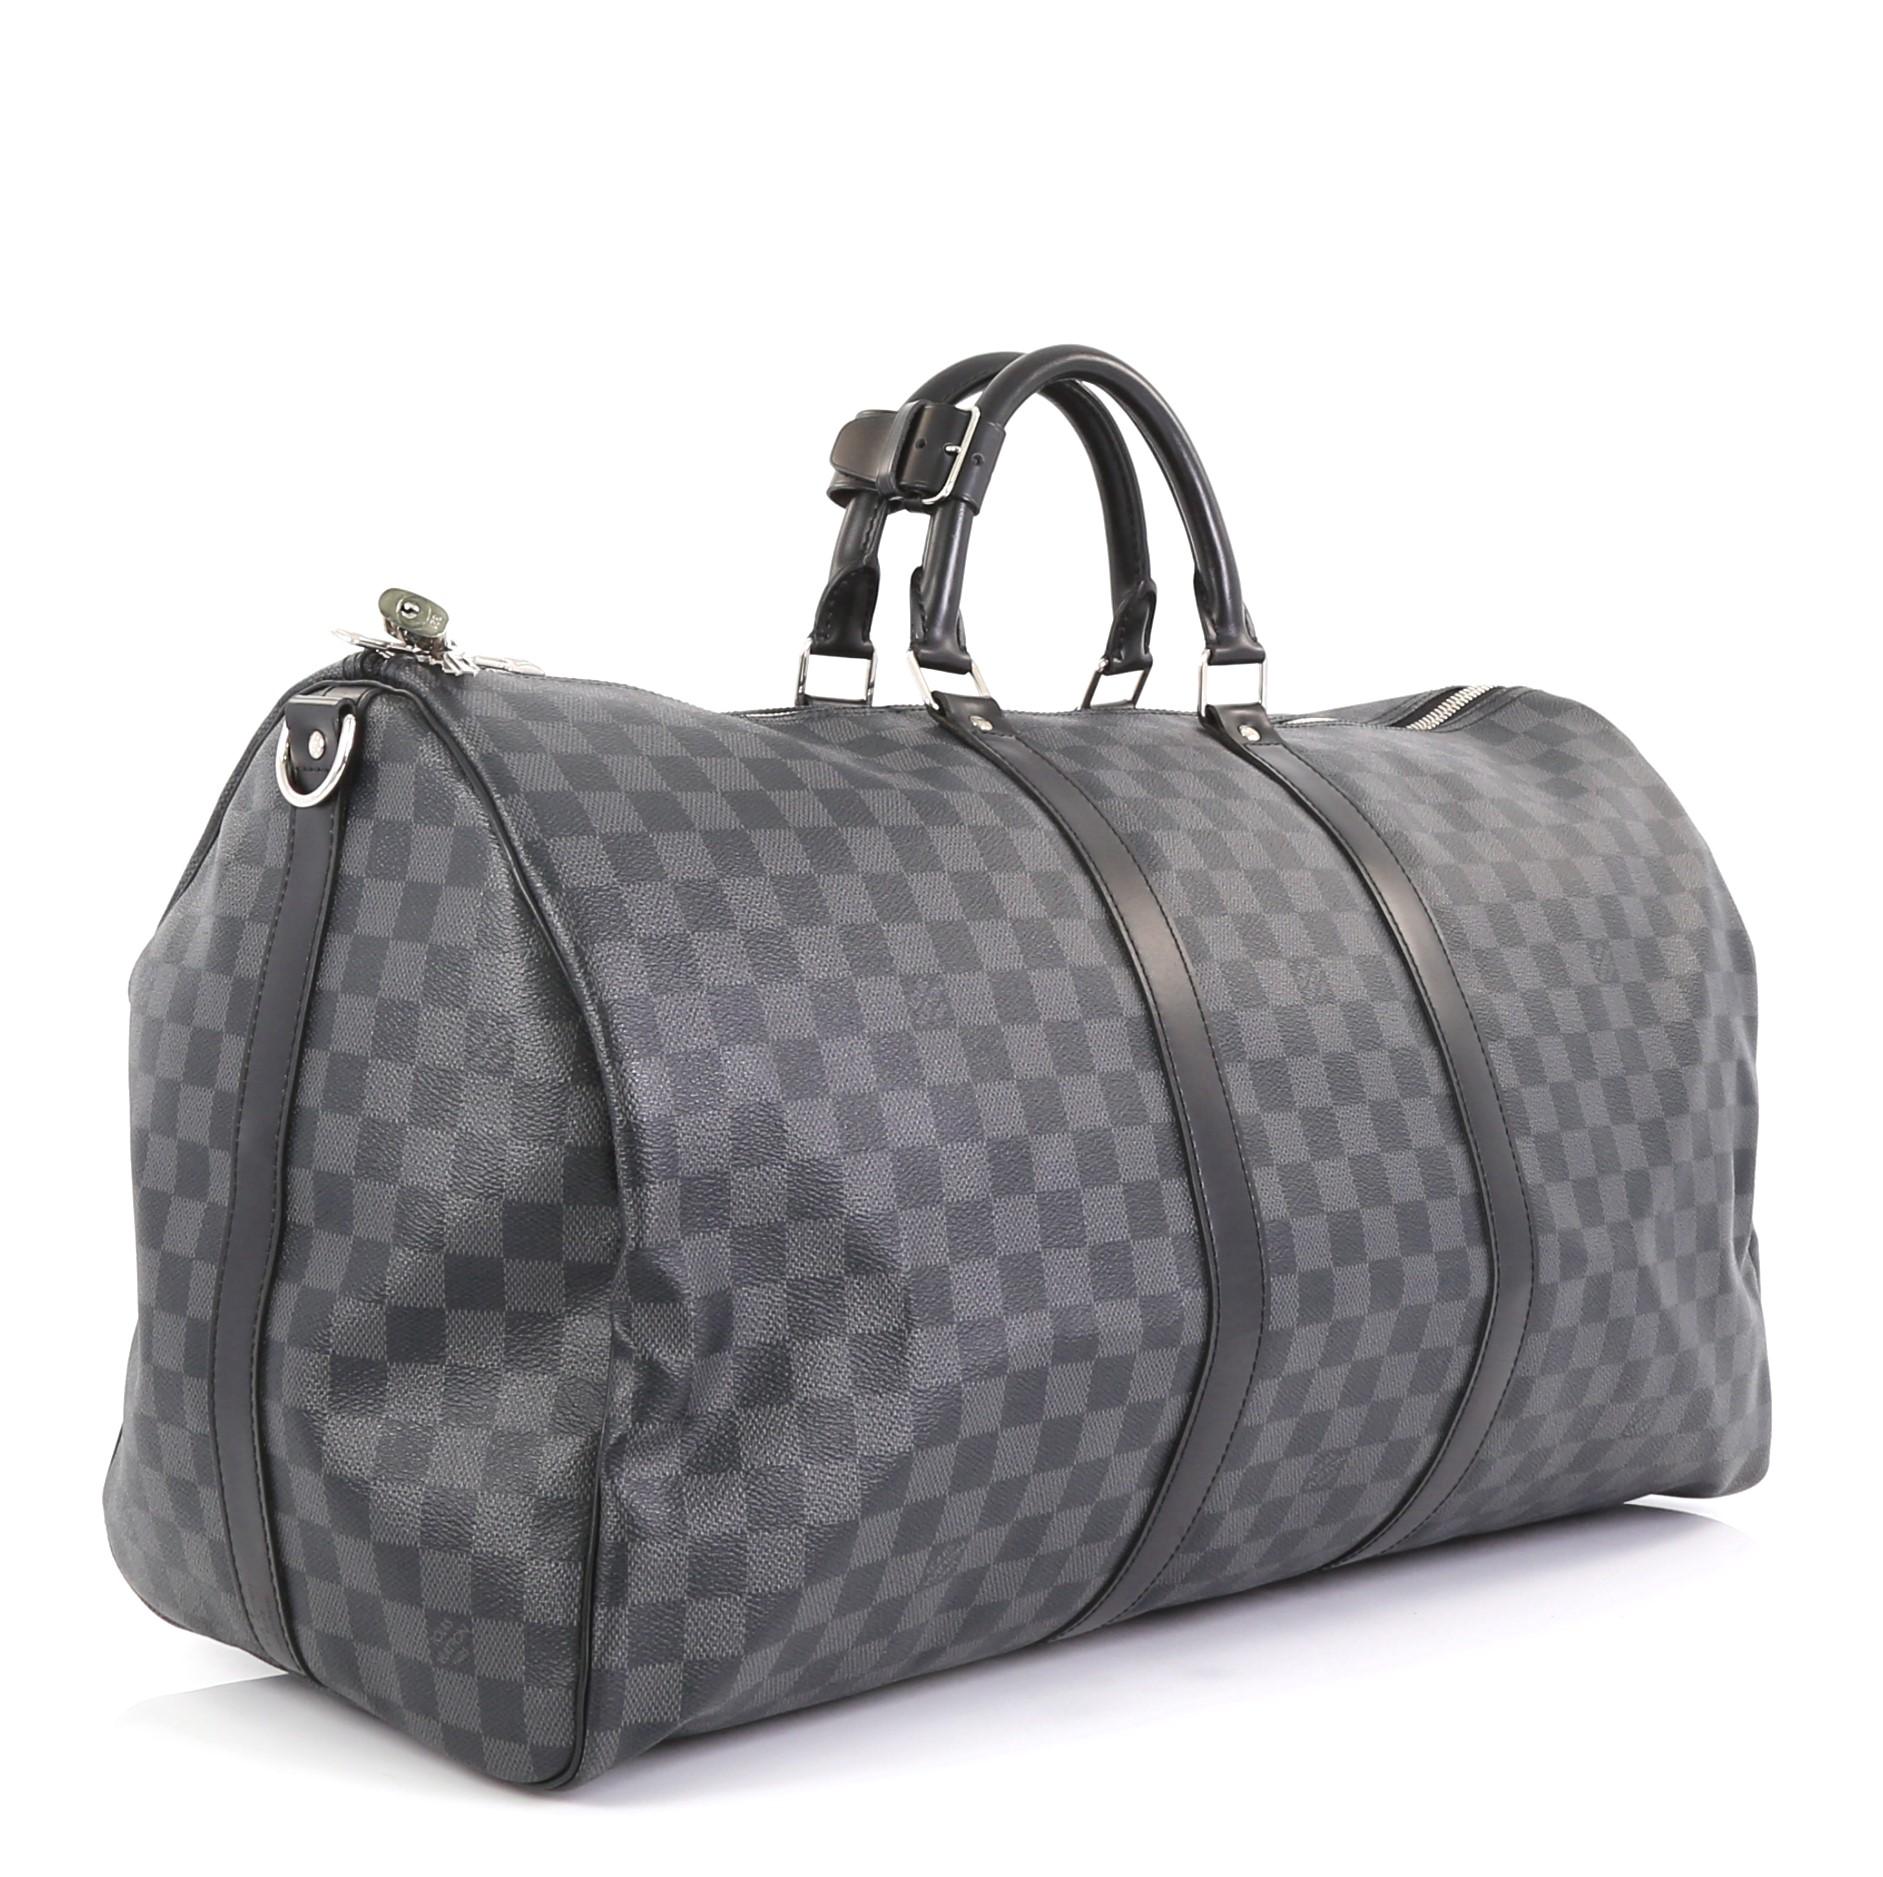 This Louis Vuitton Keepall Bandouliere Bag Damier Graphite 55, crafted with damier graphite coated canvas, features dual rolled handles, leather trim, and silver-tone hardware. Its zip closure opens to a black fabric interior. Authenticity code